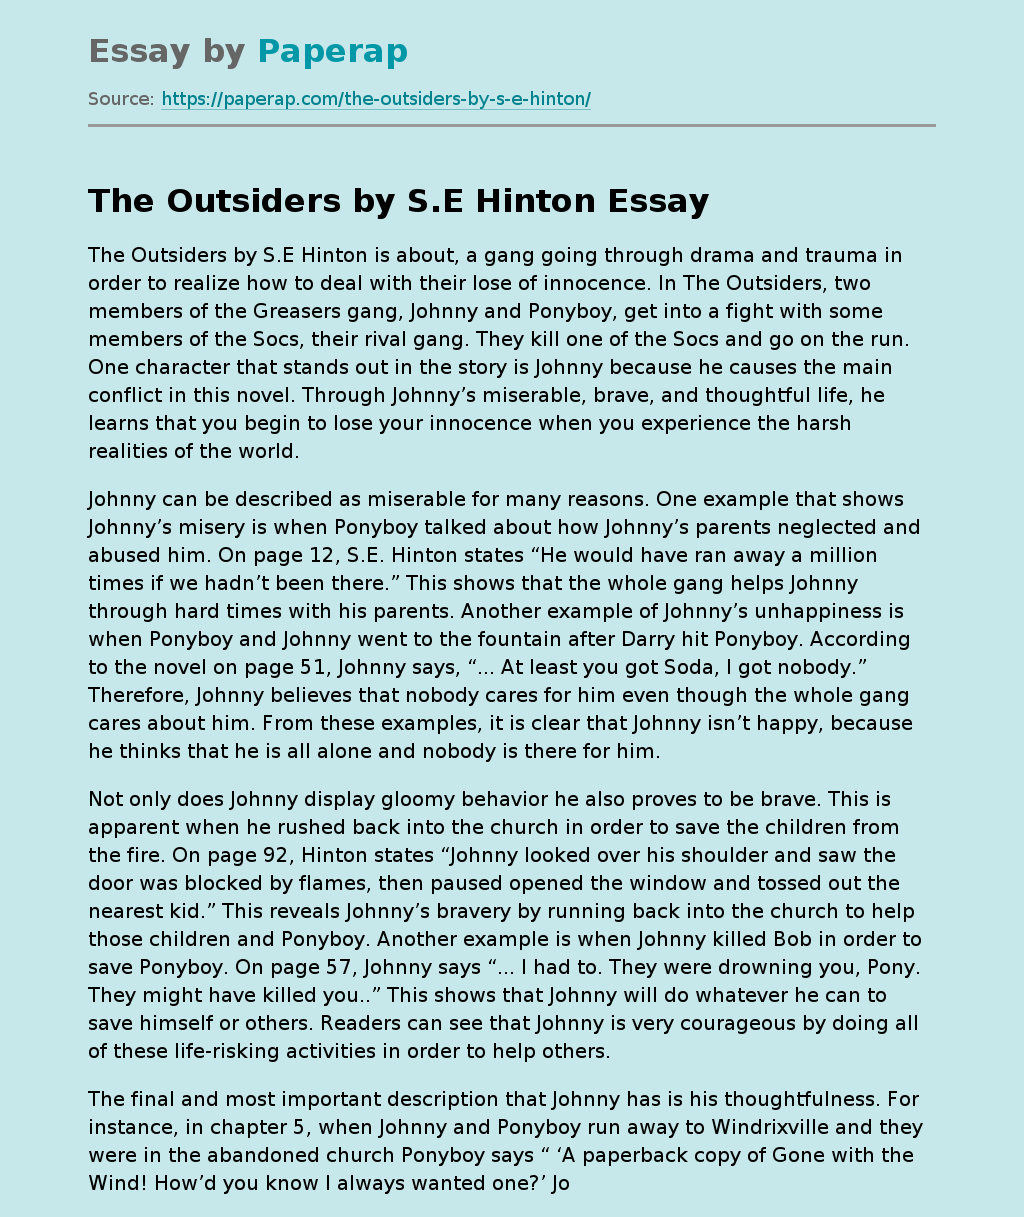 The Outsiders by S.E Hinton